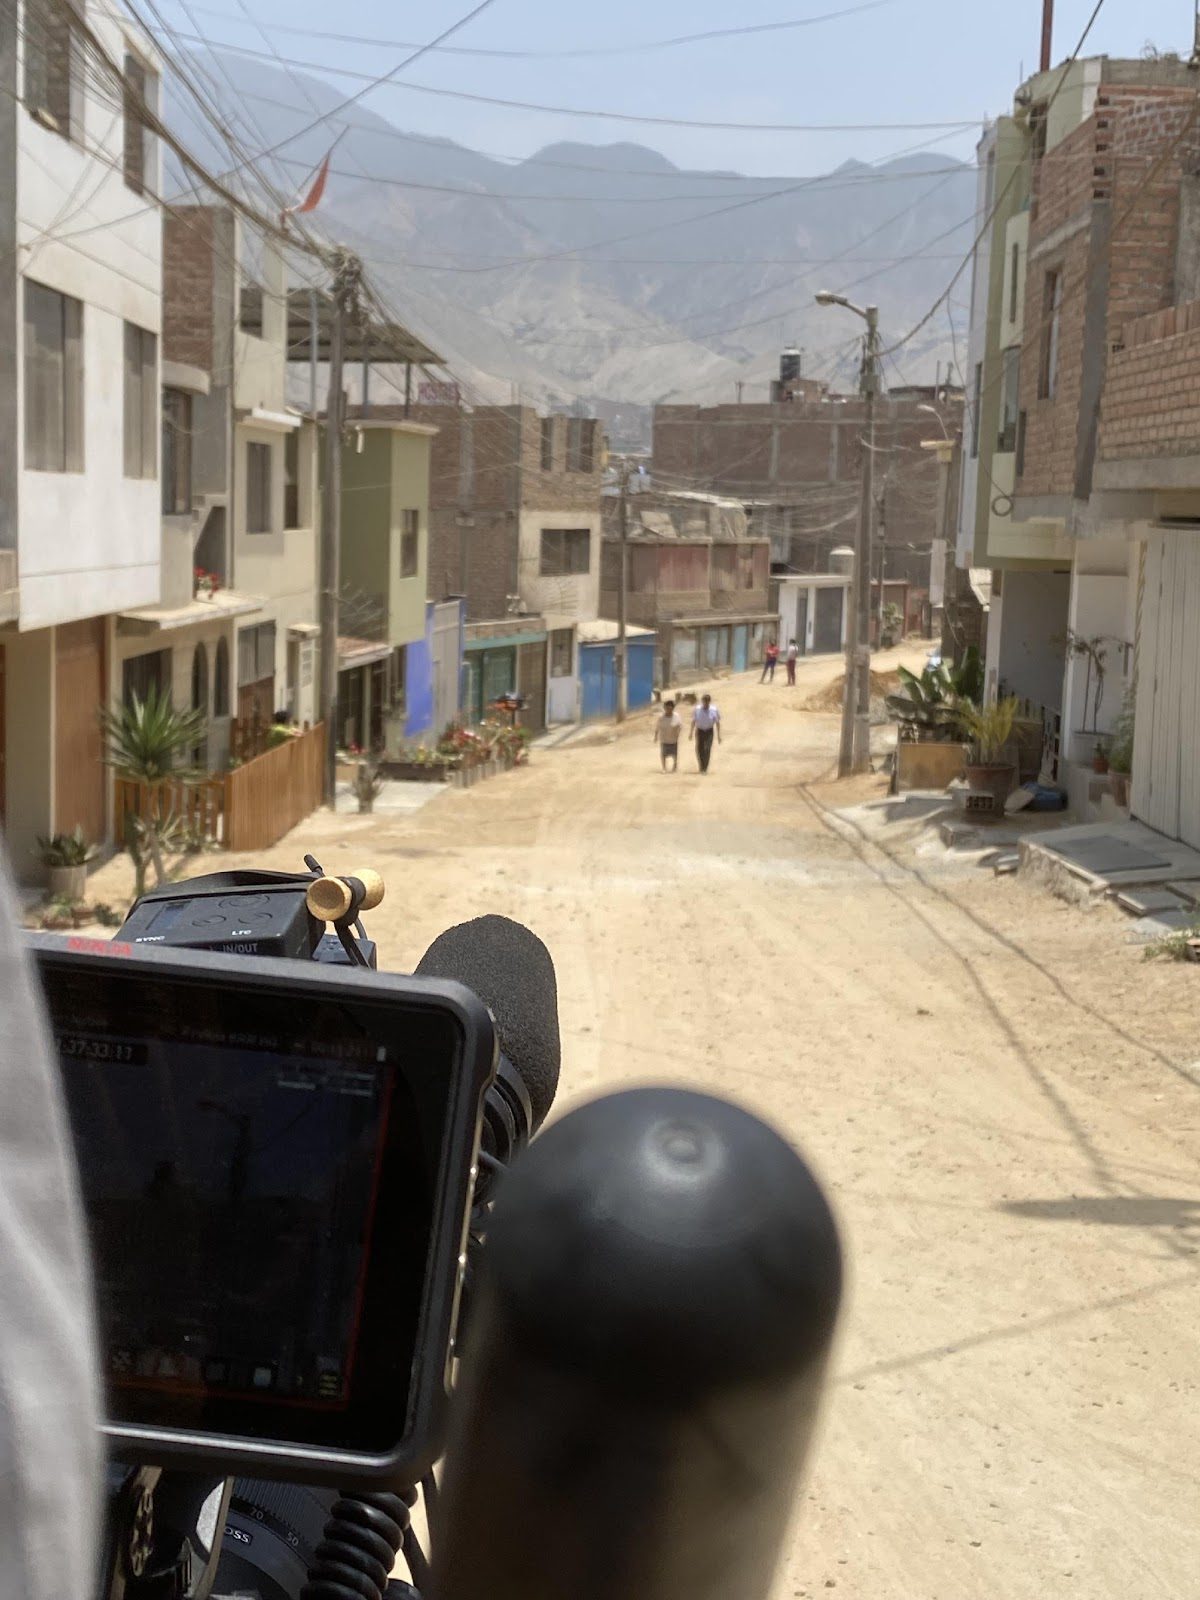 Filming in the outskirts of Lima, Peru